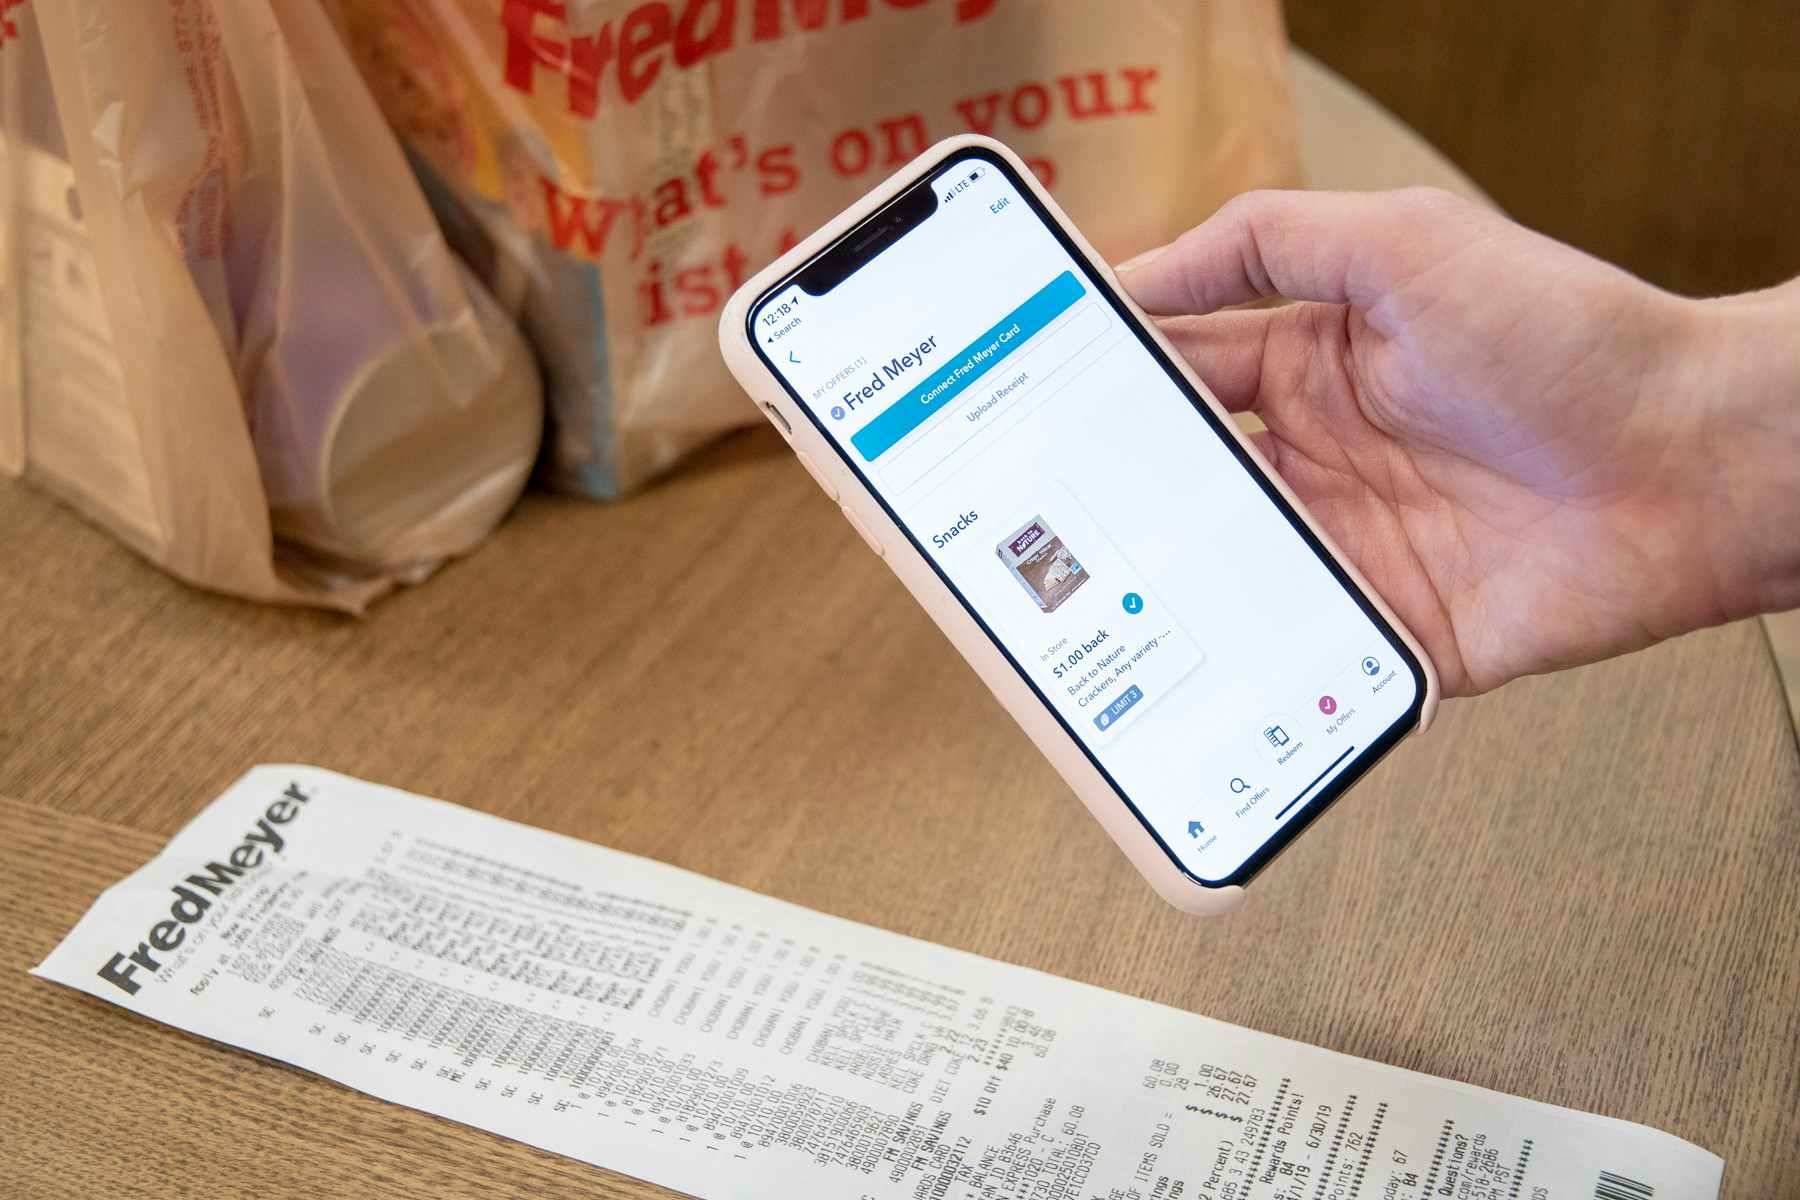 A person holding a smartphone above a receipt to take a photo for the ibotta rebate app.